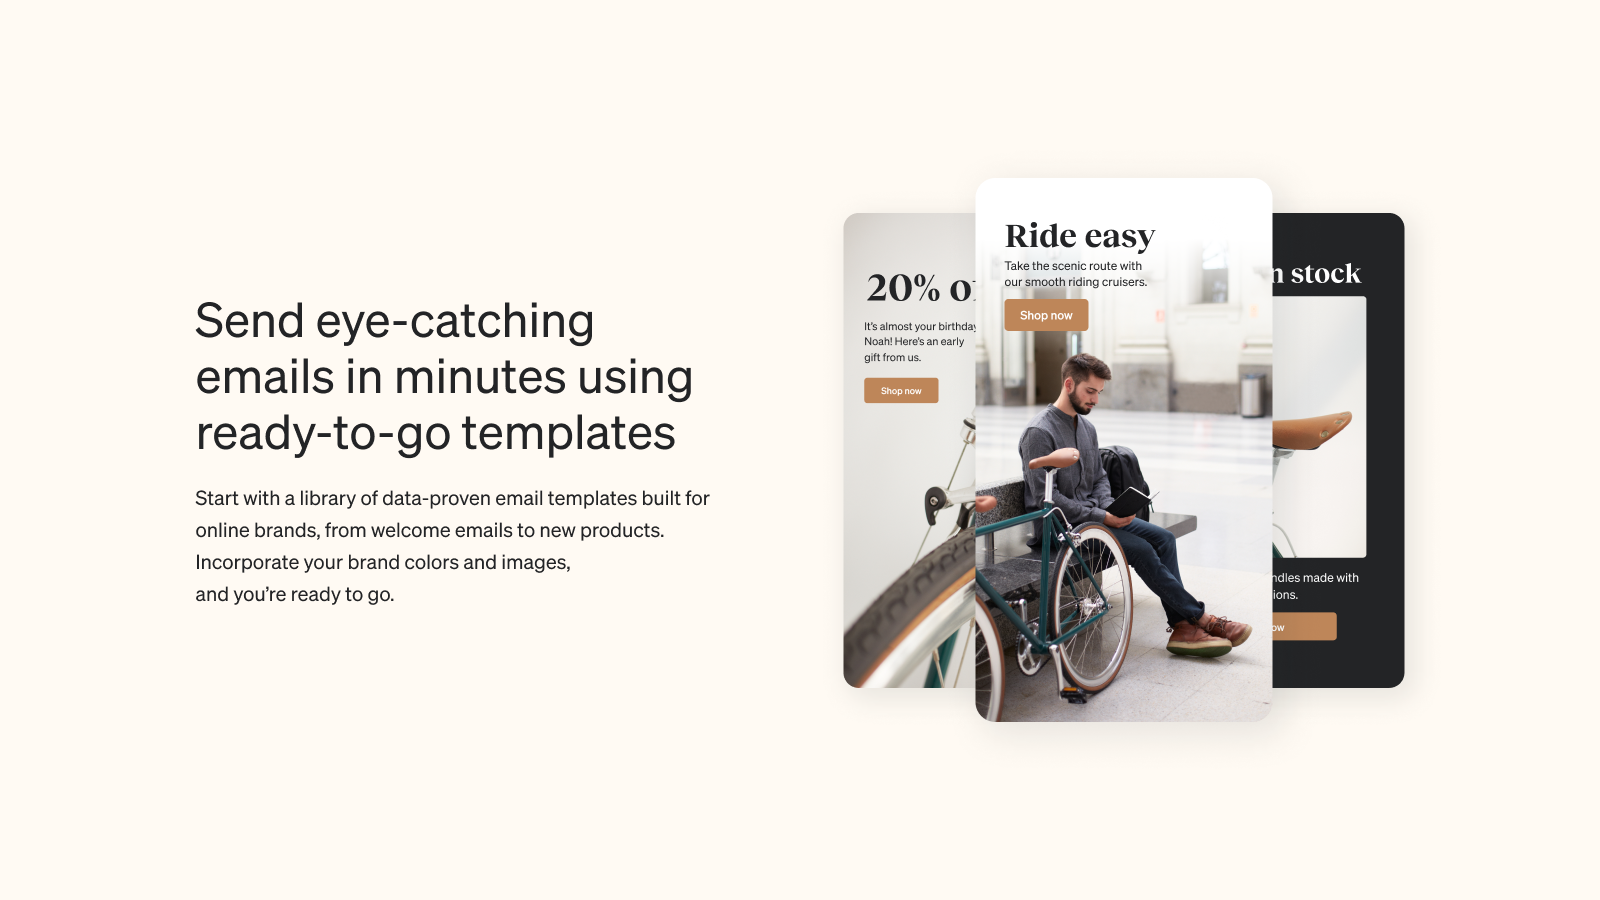 Send eye-catching emails in minutes using ready-to-go templates